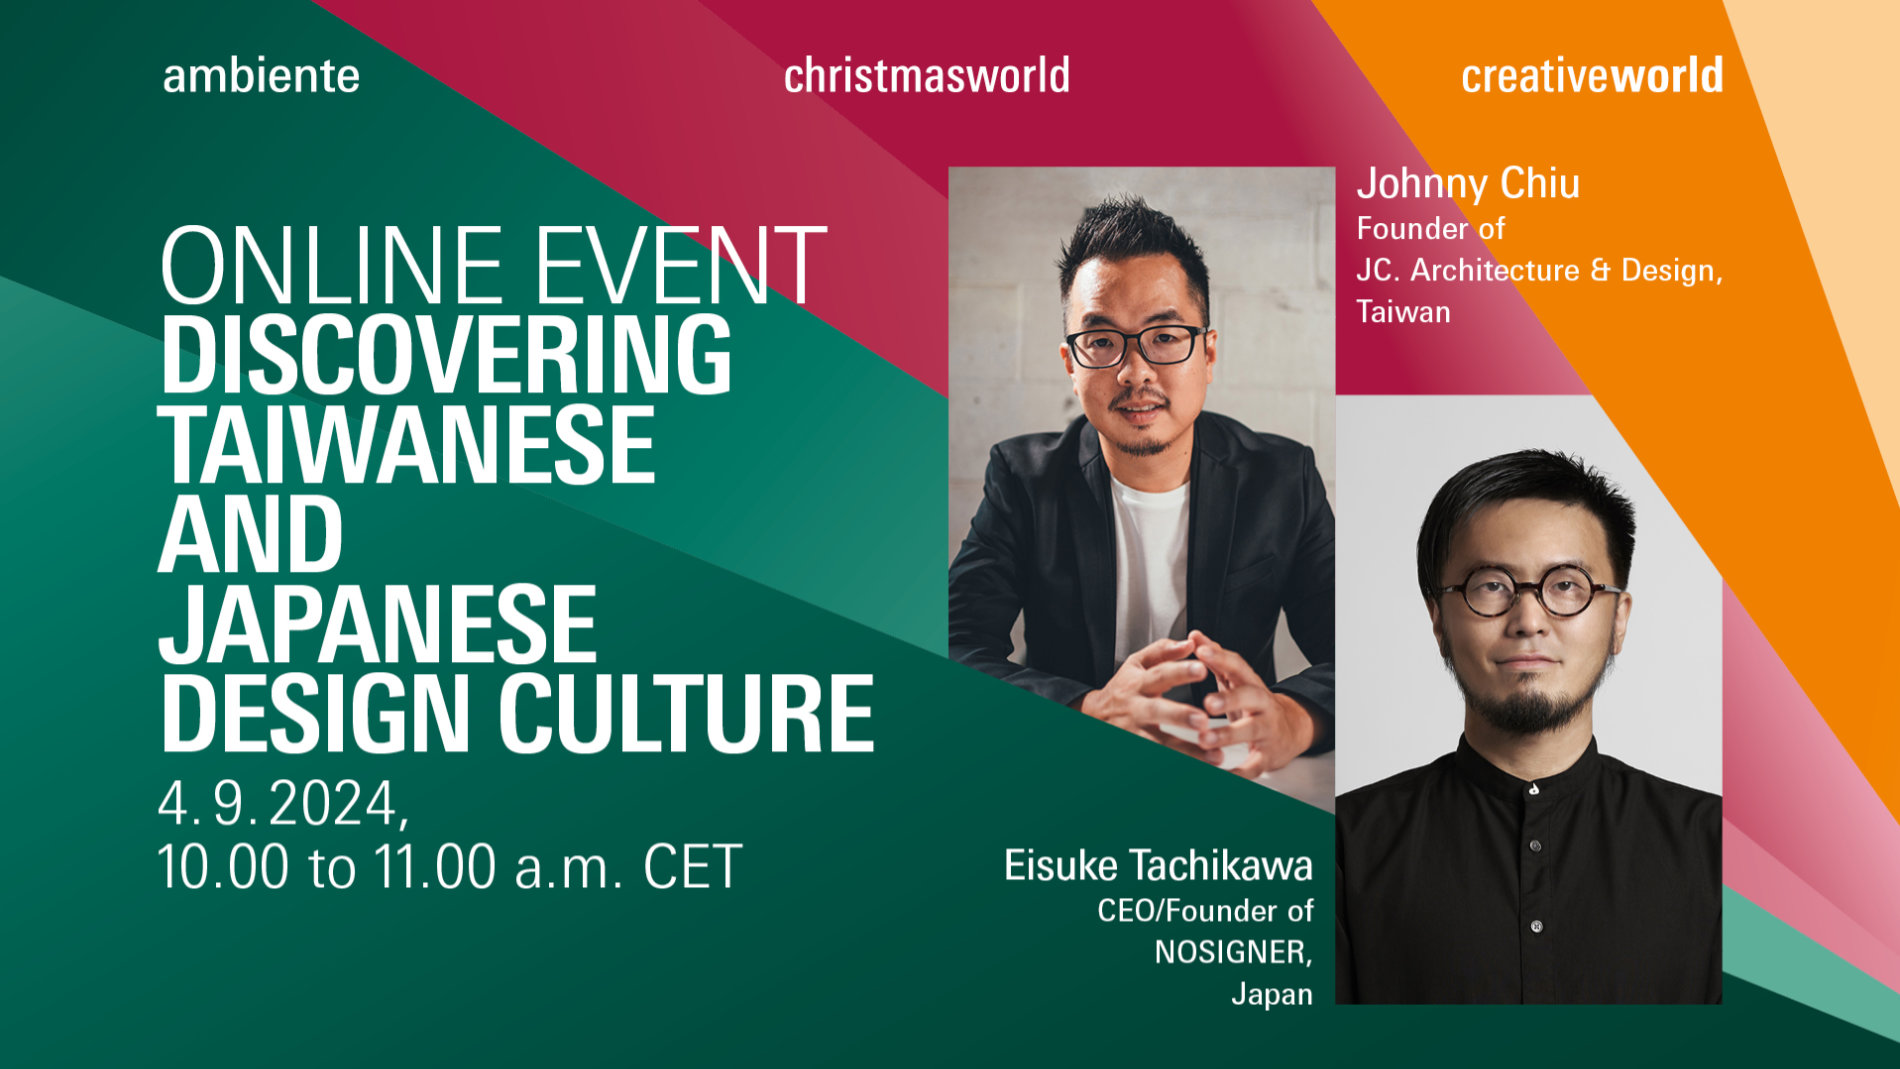 Discovering Taiwanese and Japanese design culture  with Johnny Chiu, Founder of JC. Architecture & Design (Taiwan) and Eisuke Tachikawa, CEO/Founder of NOSIGNER (Japan): 4 September 2024, 10.00 to 11.00 a.m. CET